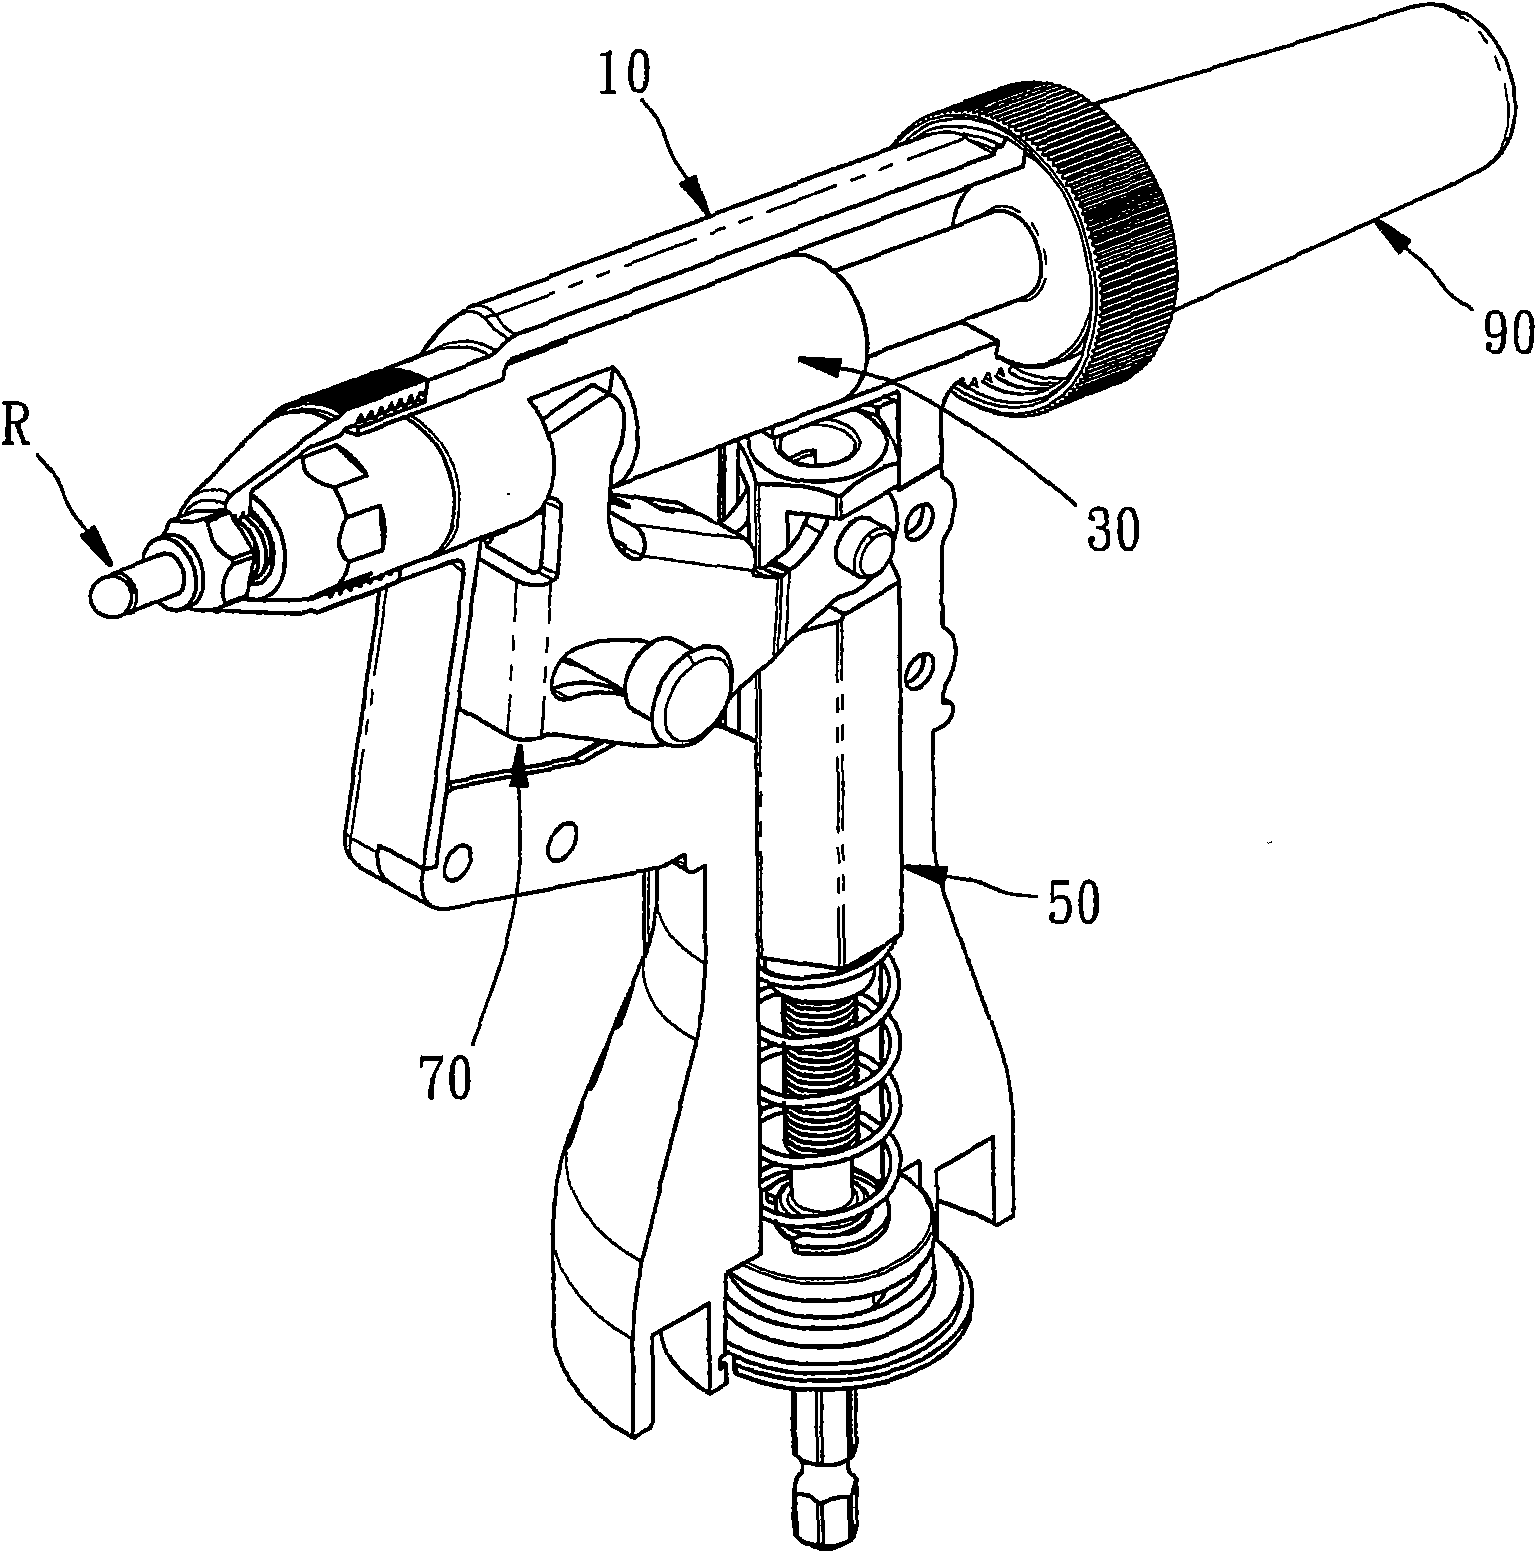 Rivet gun with improved action structure